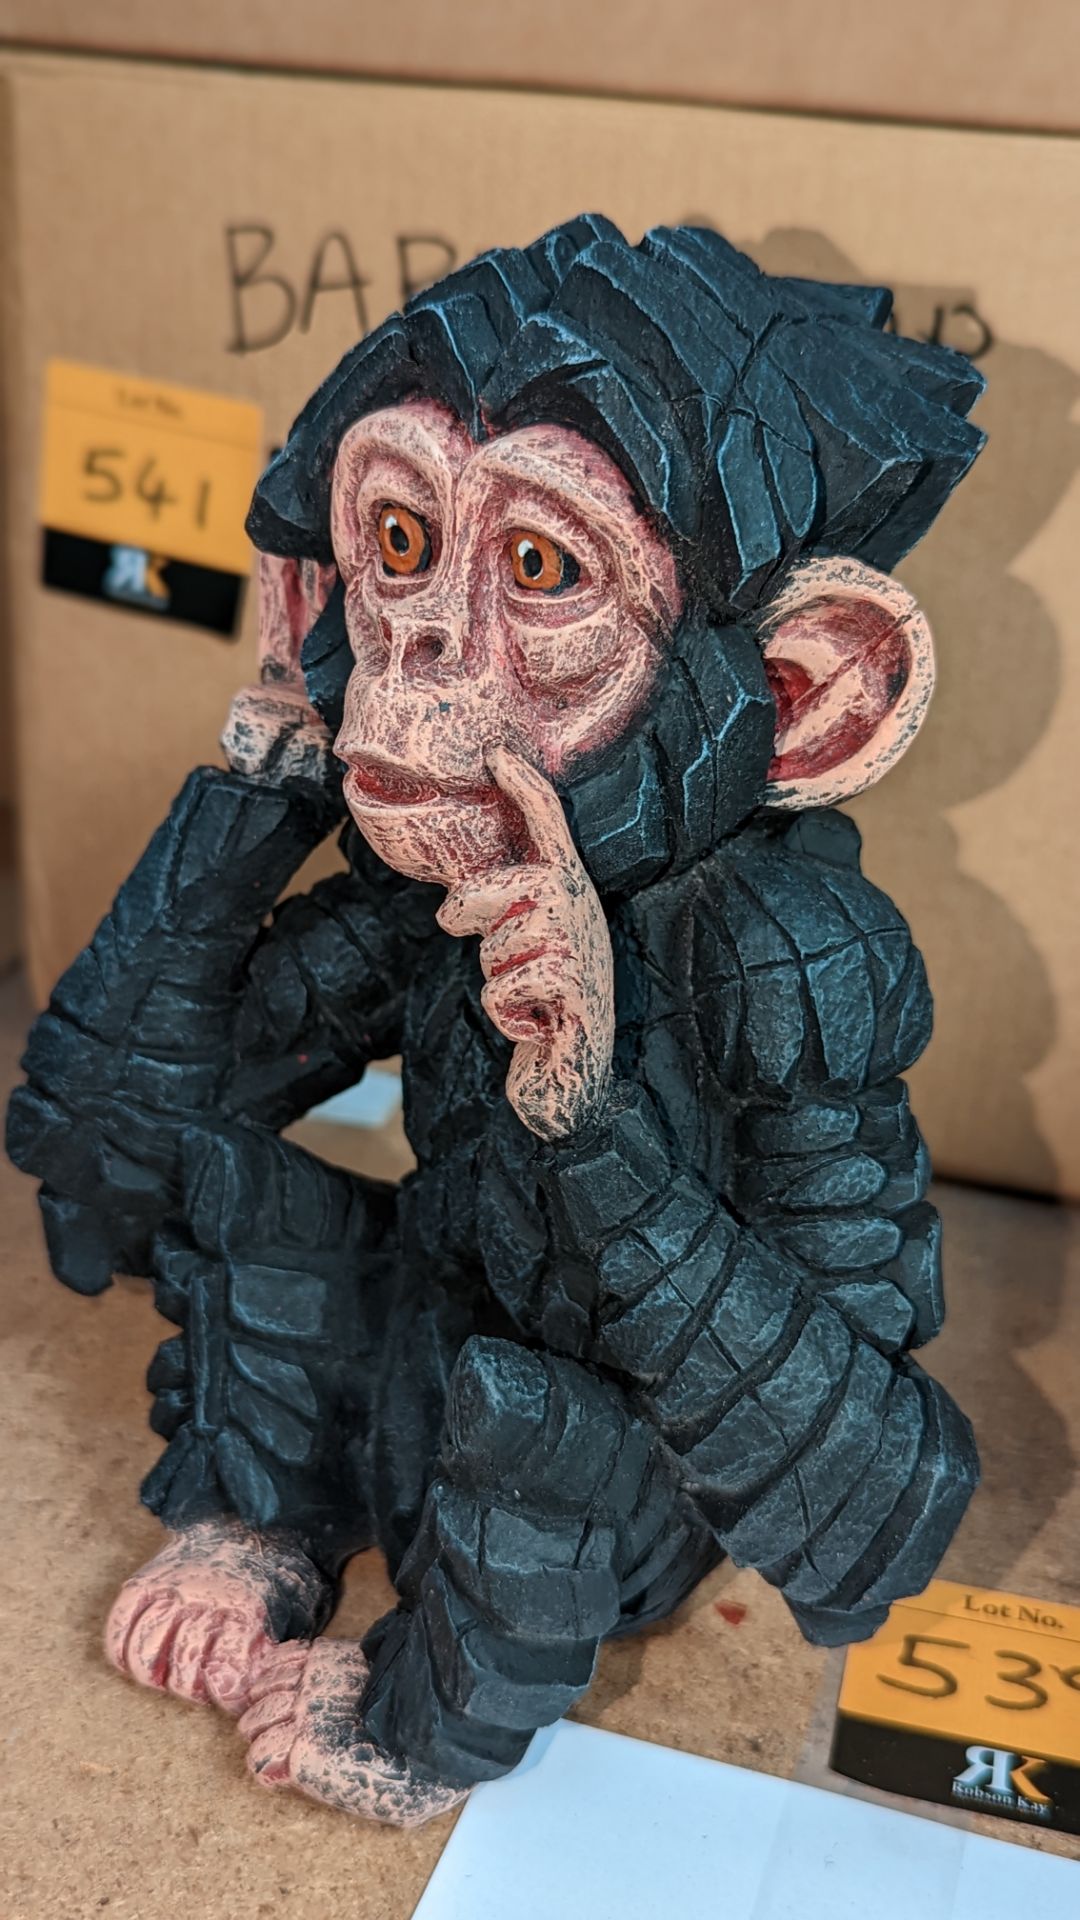 Edge Sculpture by Matt Buckley - Baby Chimpanzee bust (Hear no Evil), product code ED41, RRP £120 - Image 2 of 6